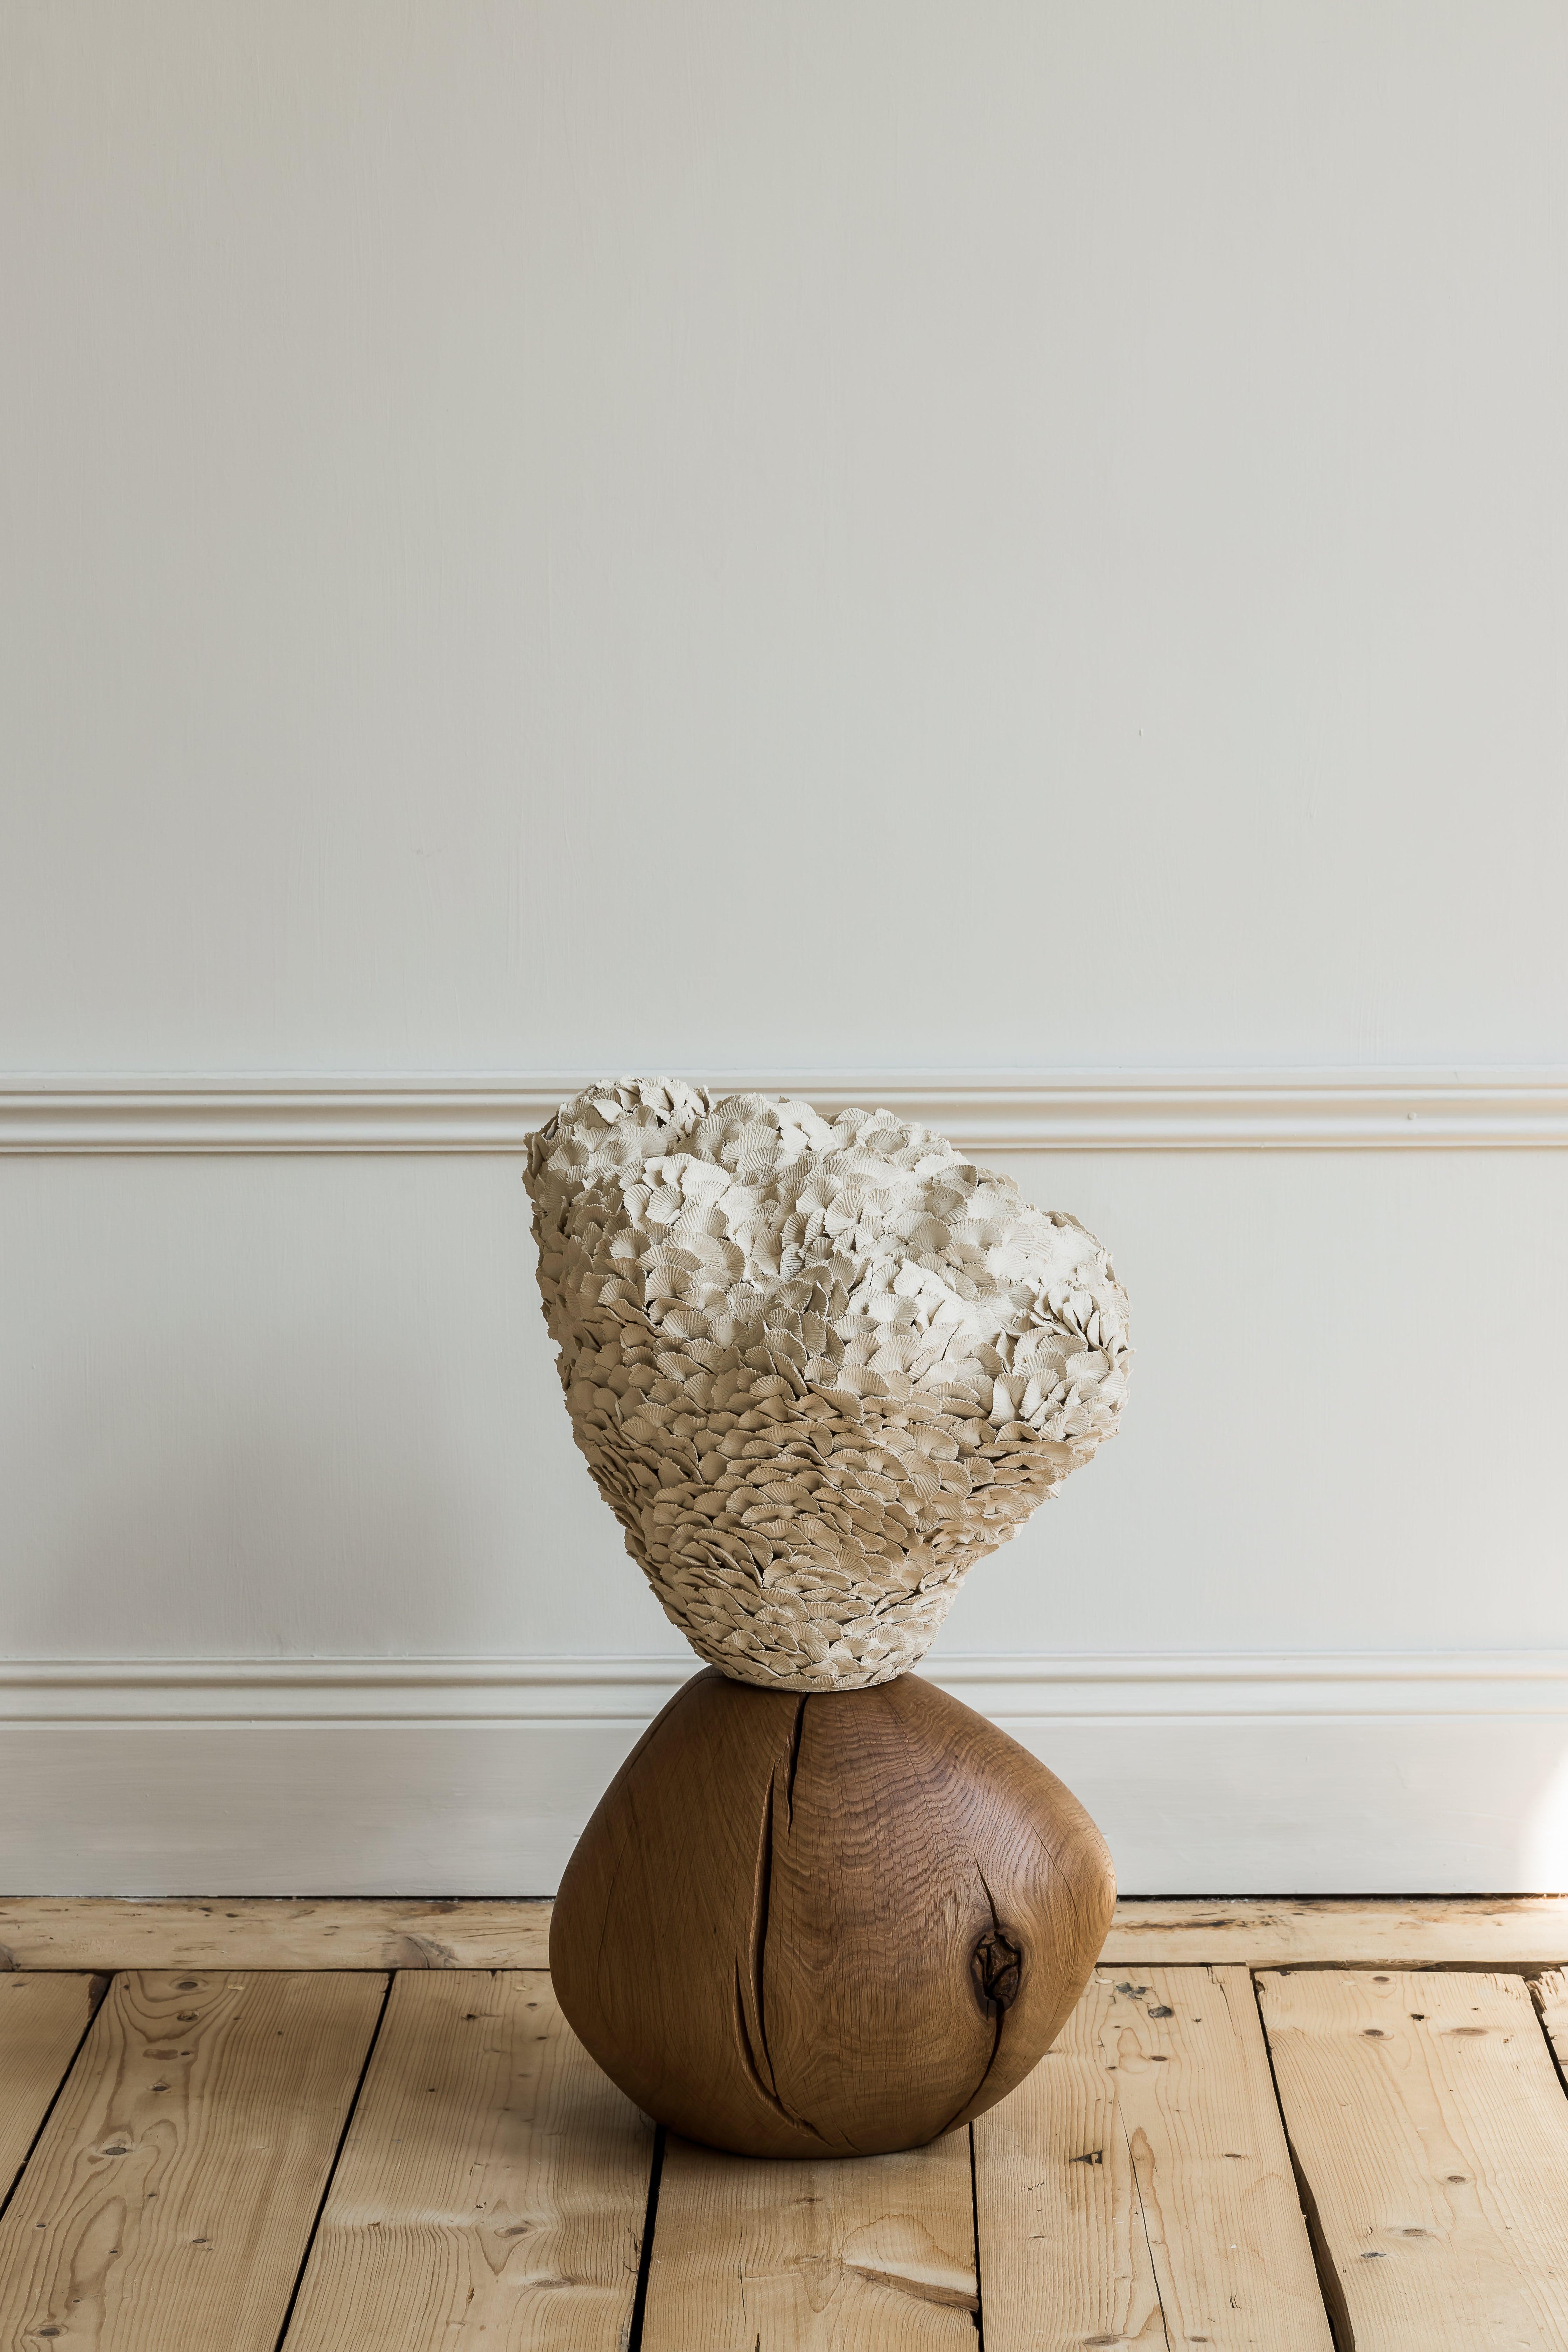 Fuga Papilio II sculpture by Hanna Heino
Dimensions: D 25 x W 30 x H 62 cm
Materials: Handbuilt, stoneware clay, hand-carved solid oak, natural wax, wood.
Also available in different dimensions. 


Hanna Heino is a contemporary clay artist